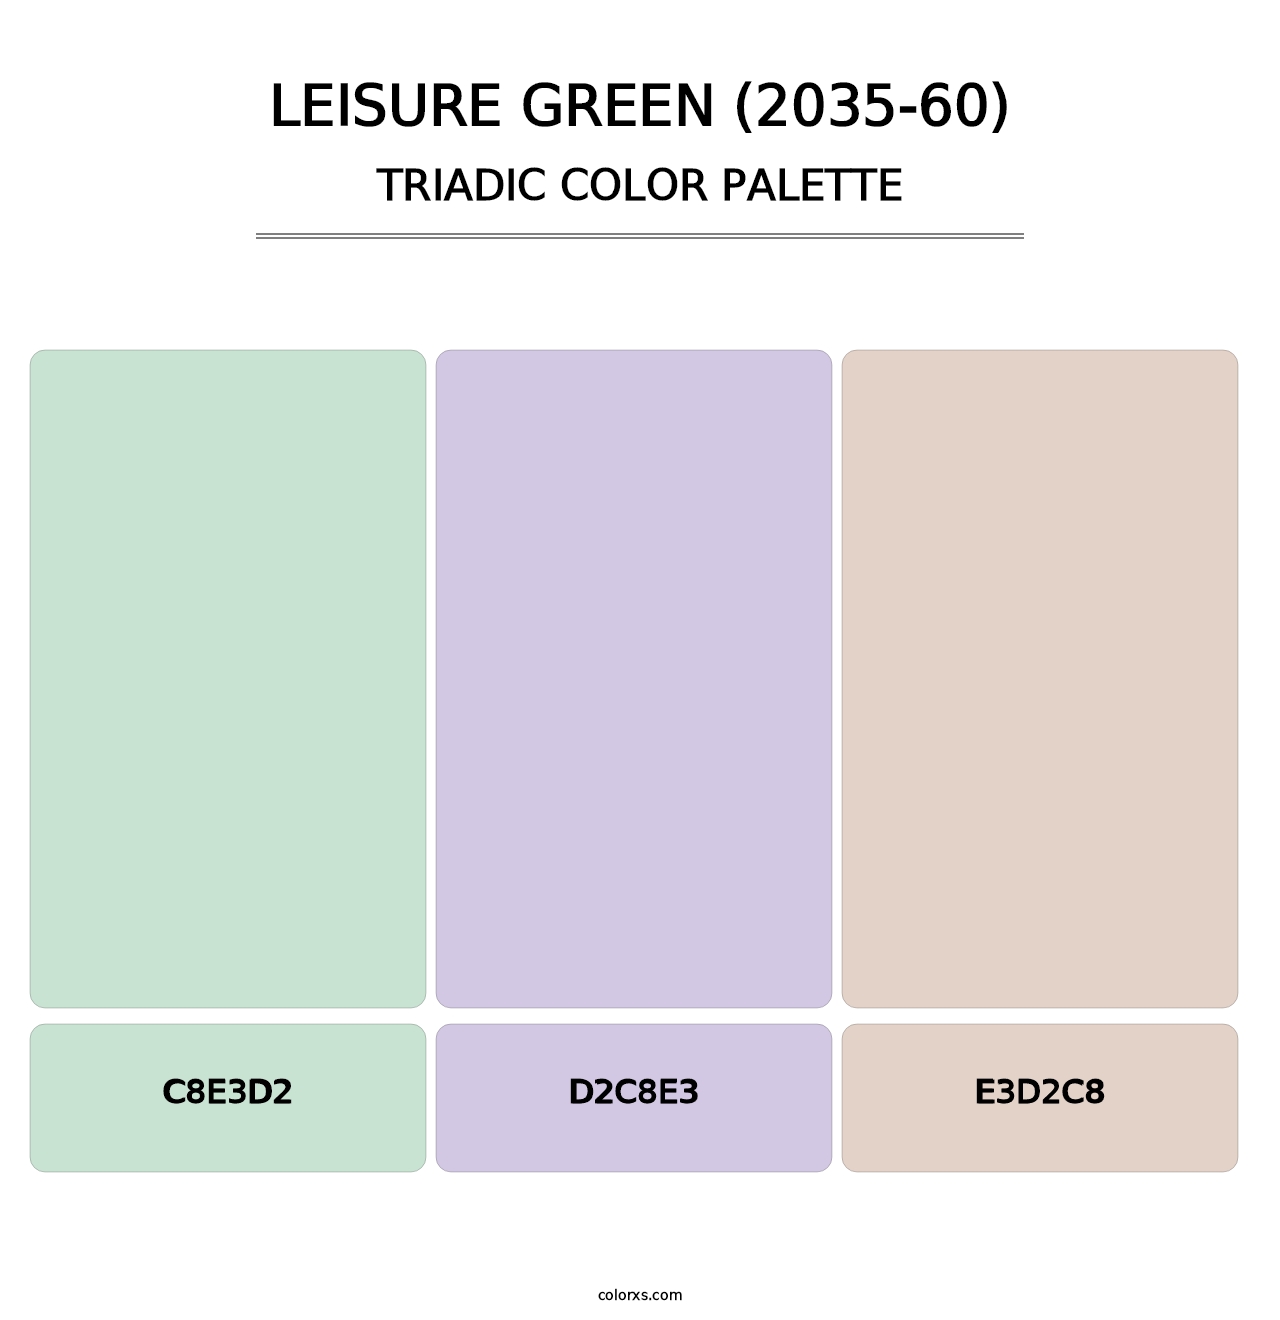 Leisure Green (2035-60) - Triadic Color Palette